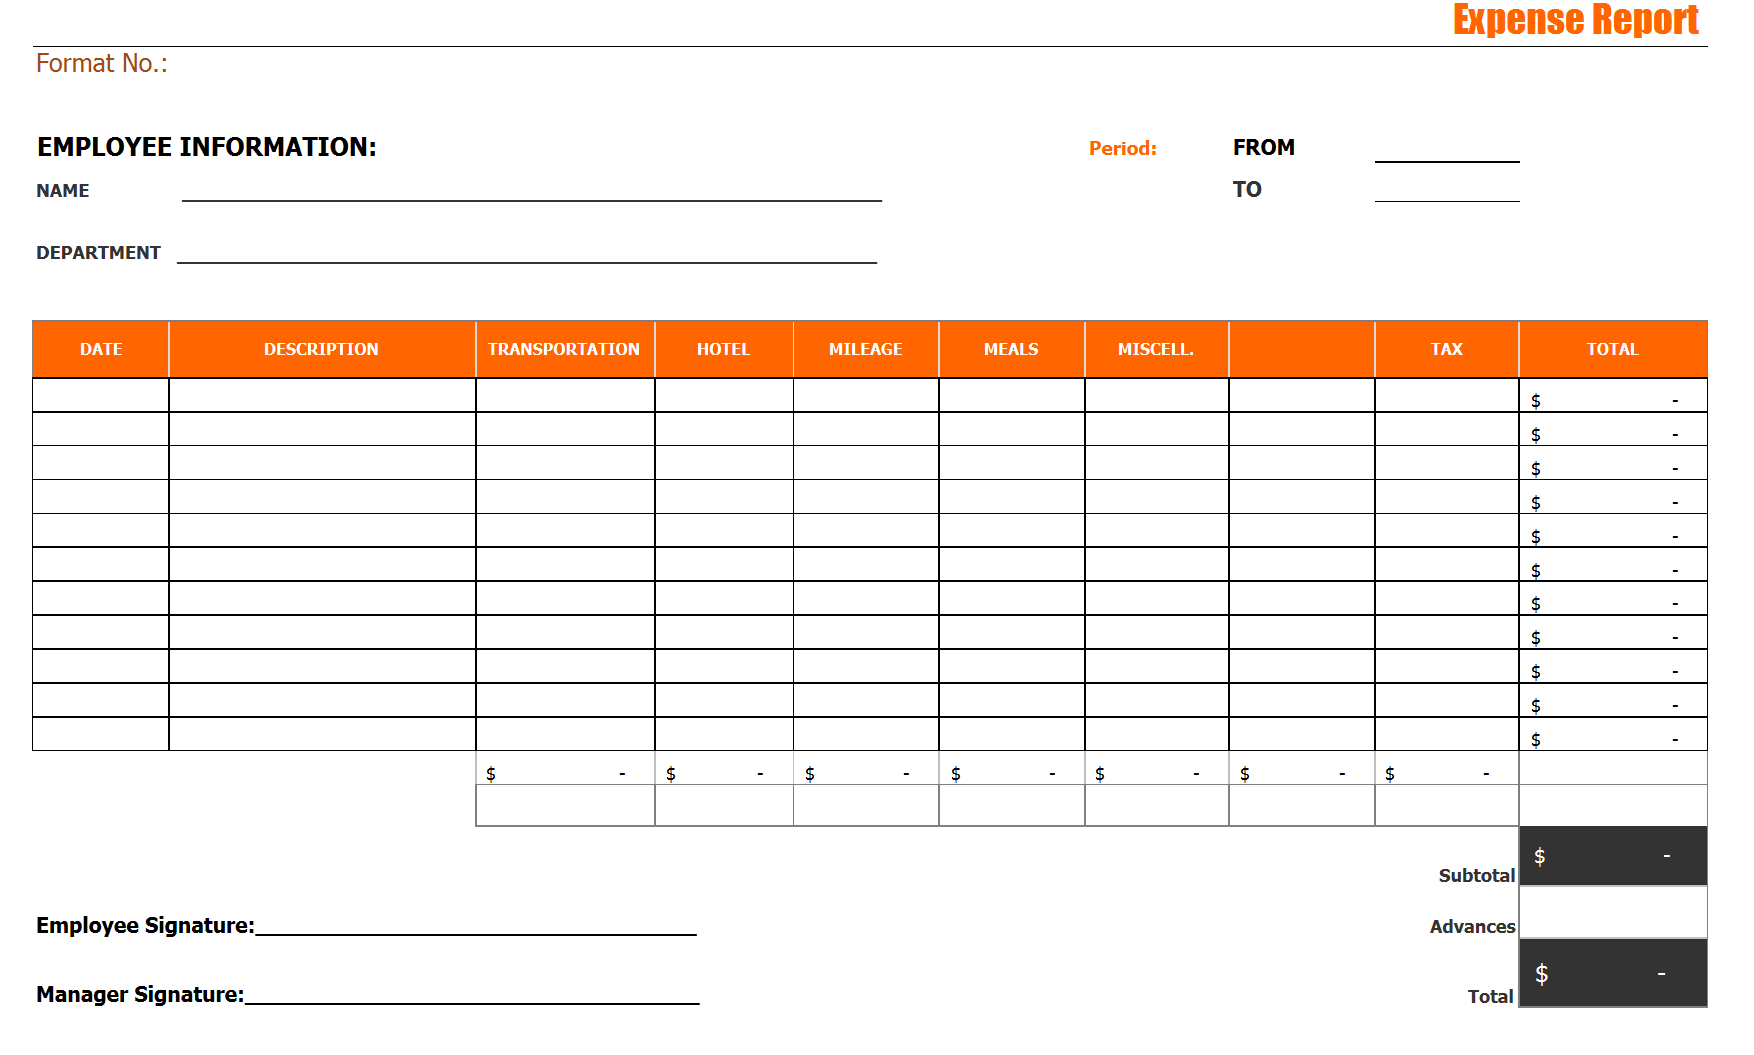 business monthly expense sheet free printable